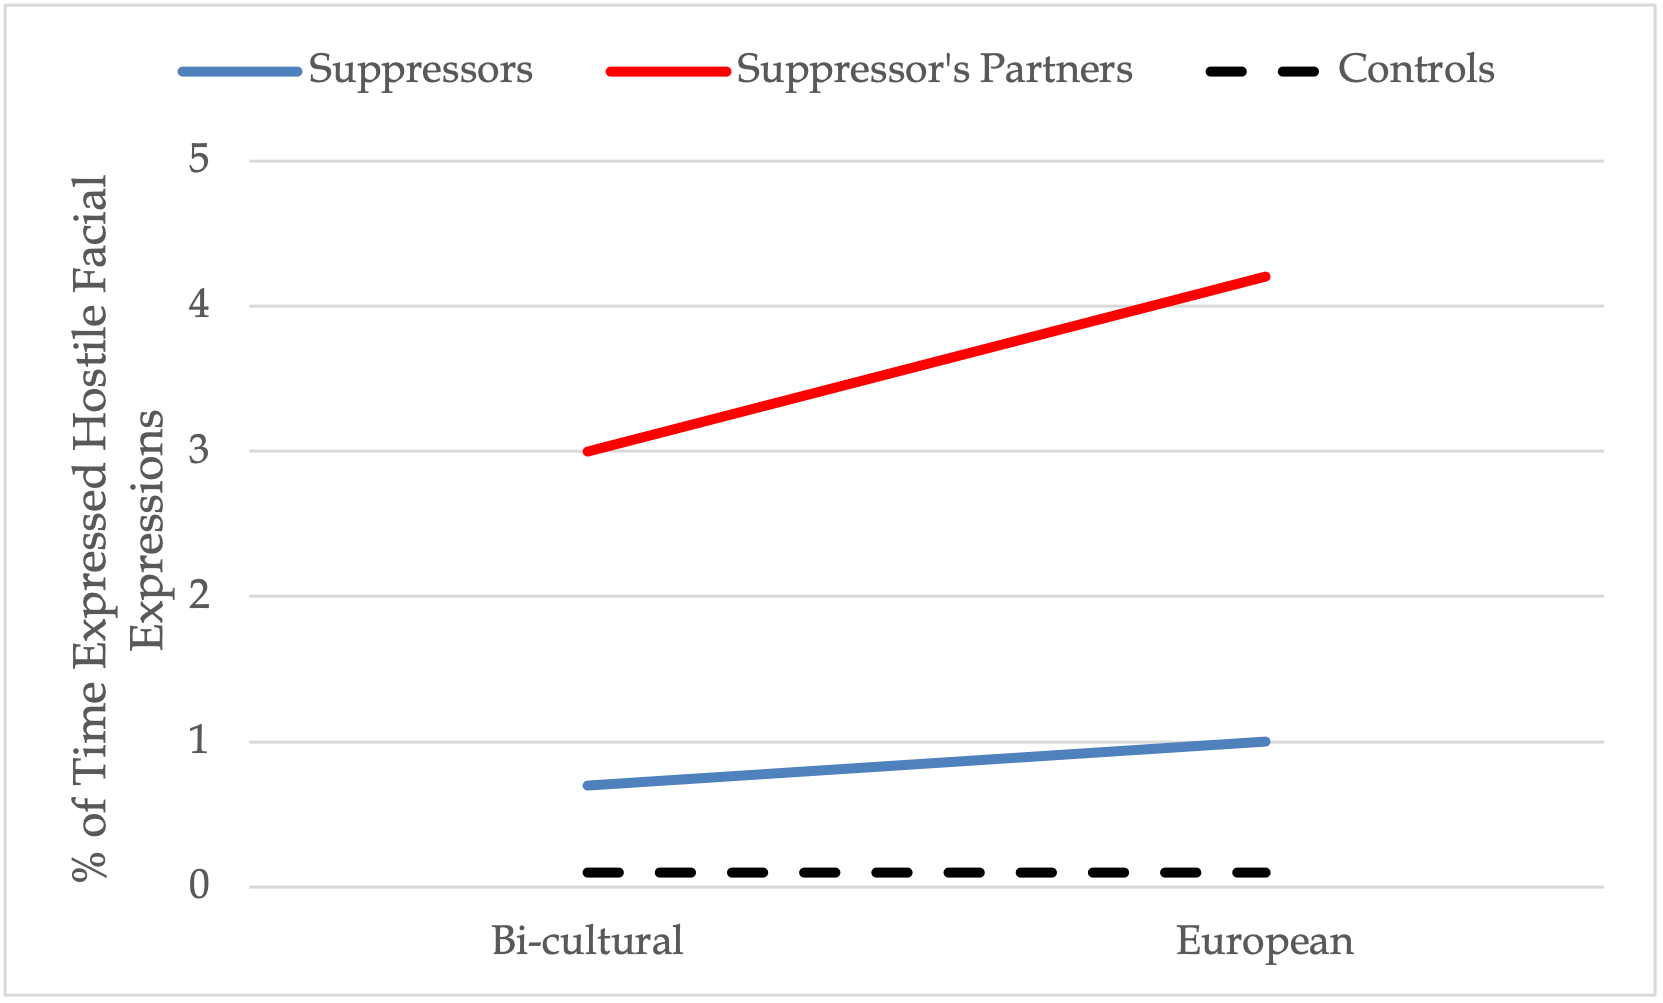 A line graph with three lines. A blue line for Suppressors. A red line for Suppressor's Partners. A dashed line for controls. The x axis is labeled: self-reported cultural values. The x axis consists of two sections. The left half of the x axis is labeled: Bi-cultural, while the second half is labeled: European. This indicates that as the lines travel across the x axis, they start with data for bi-cultural values, transitioning to european values for the data in the second half of each line. The y axis is labeled: % of time expressed hostile facial expressions. The y axis starts at 0 and incremented by 1 to a maximum of 5.